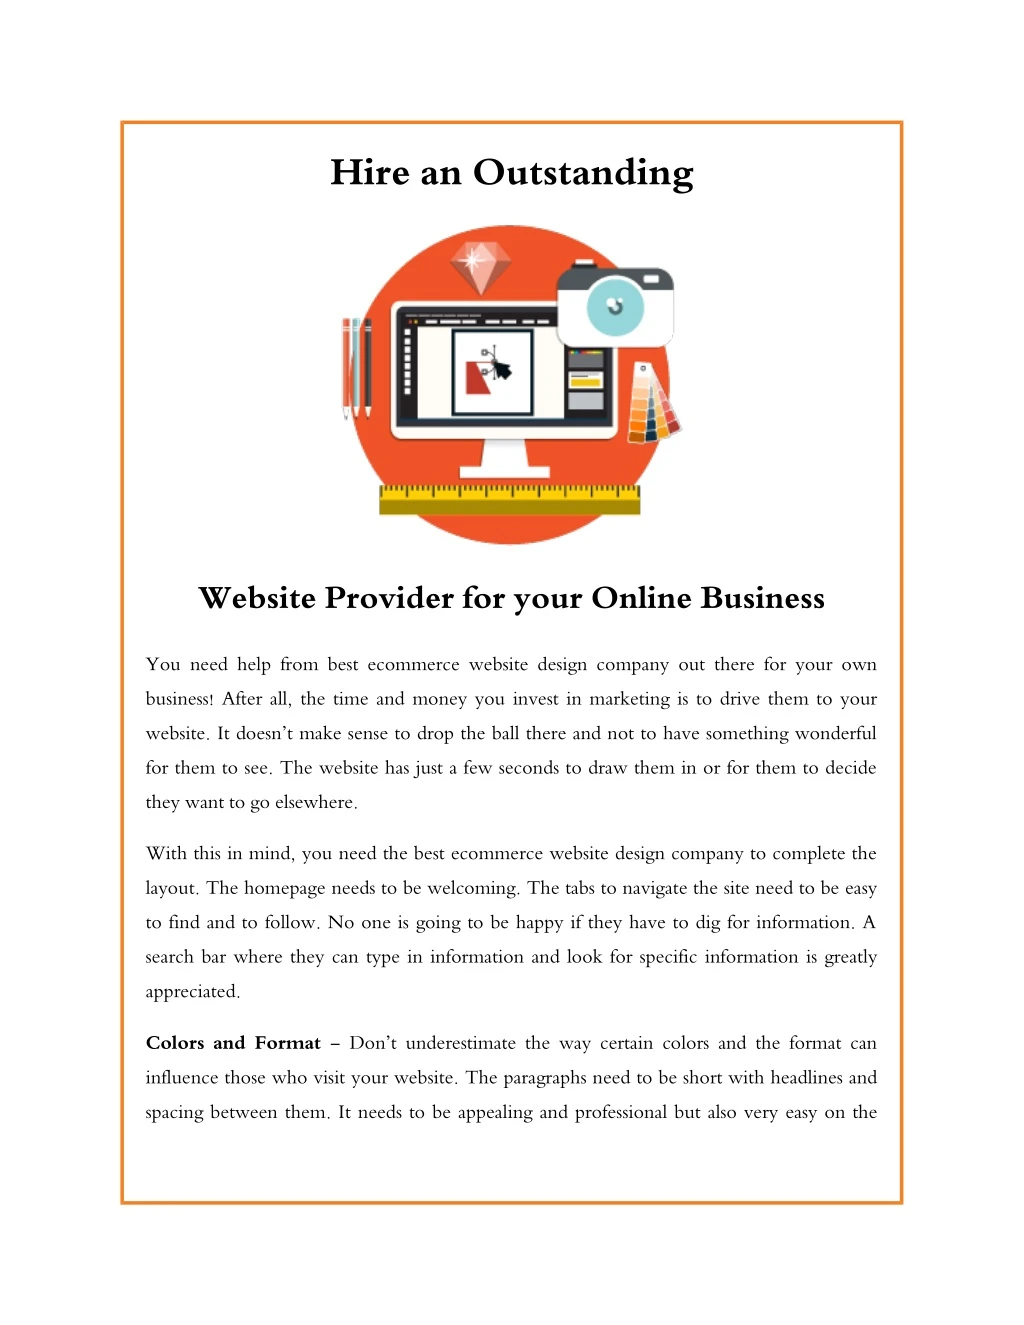 hire an outstanding